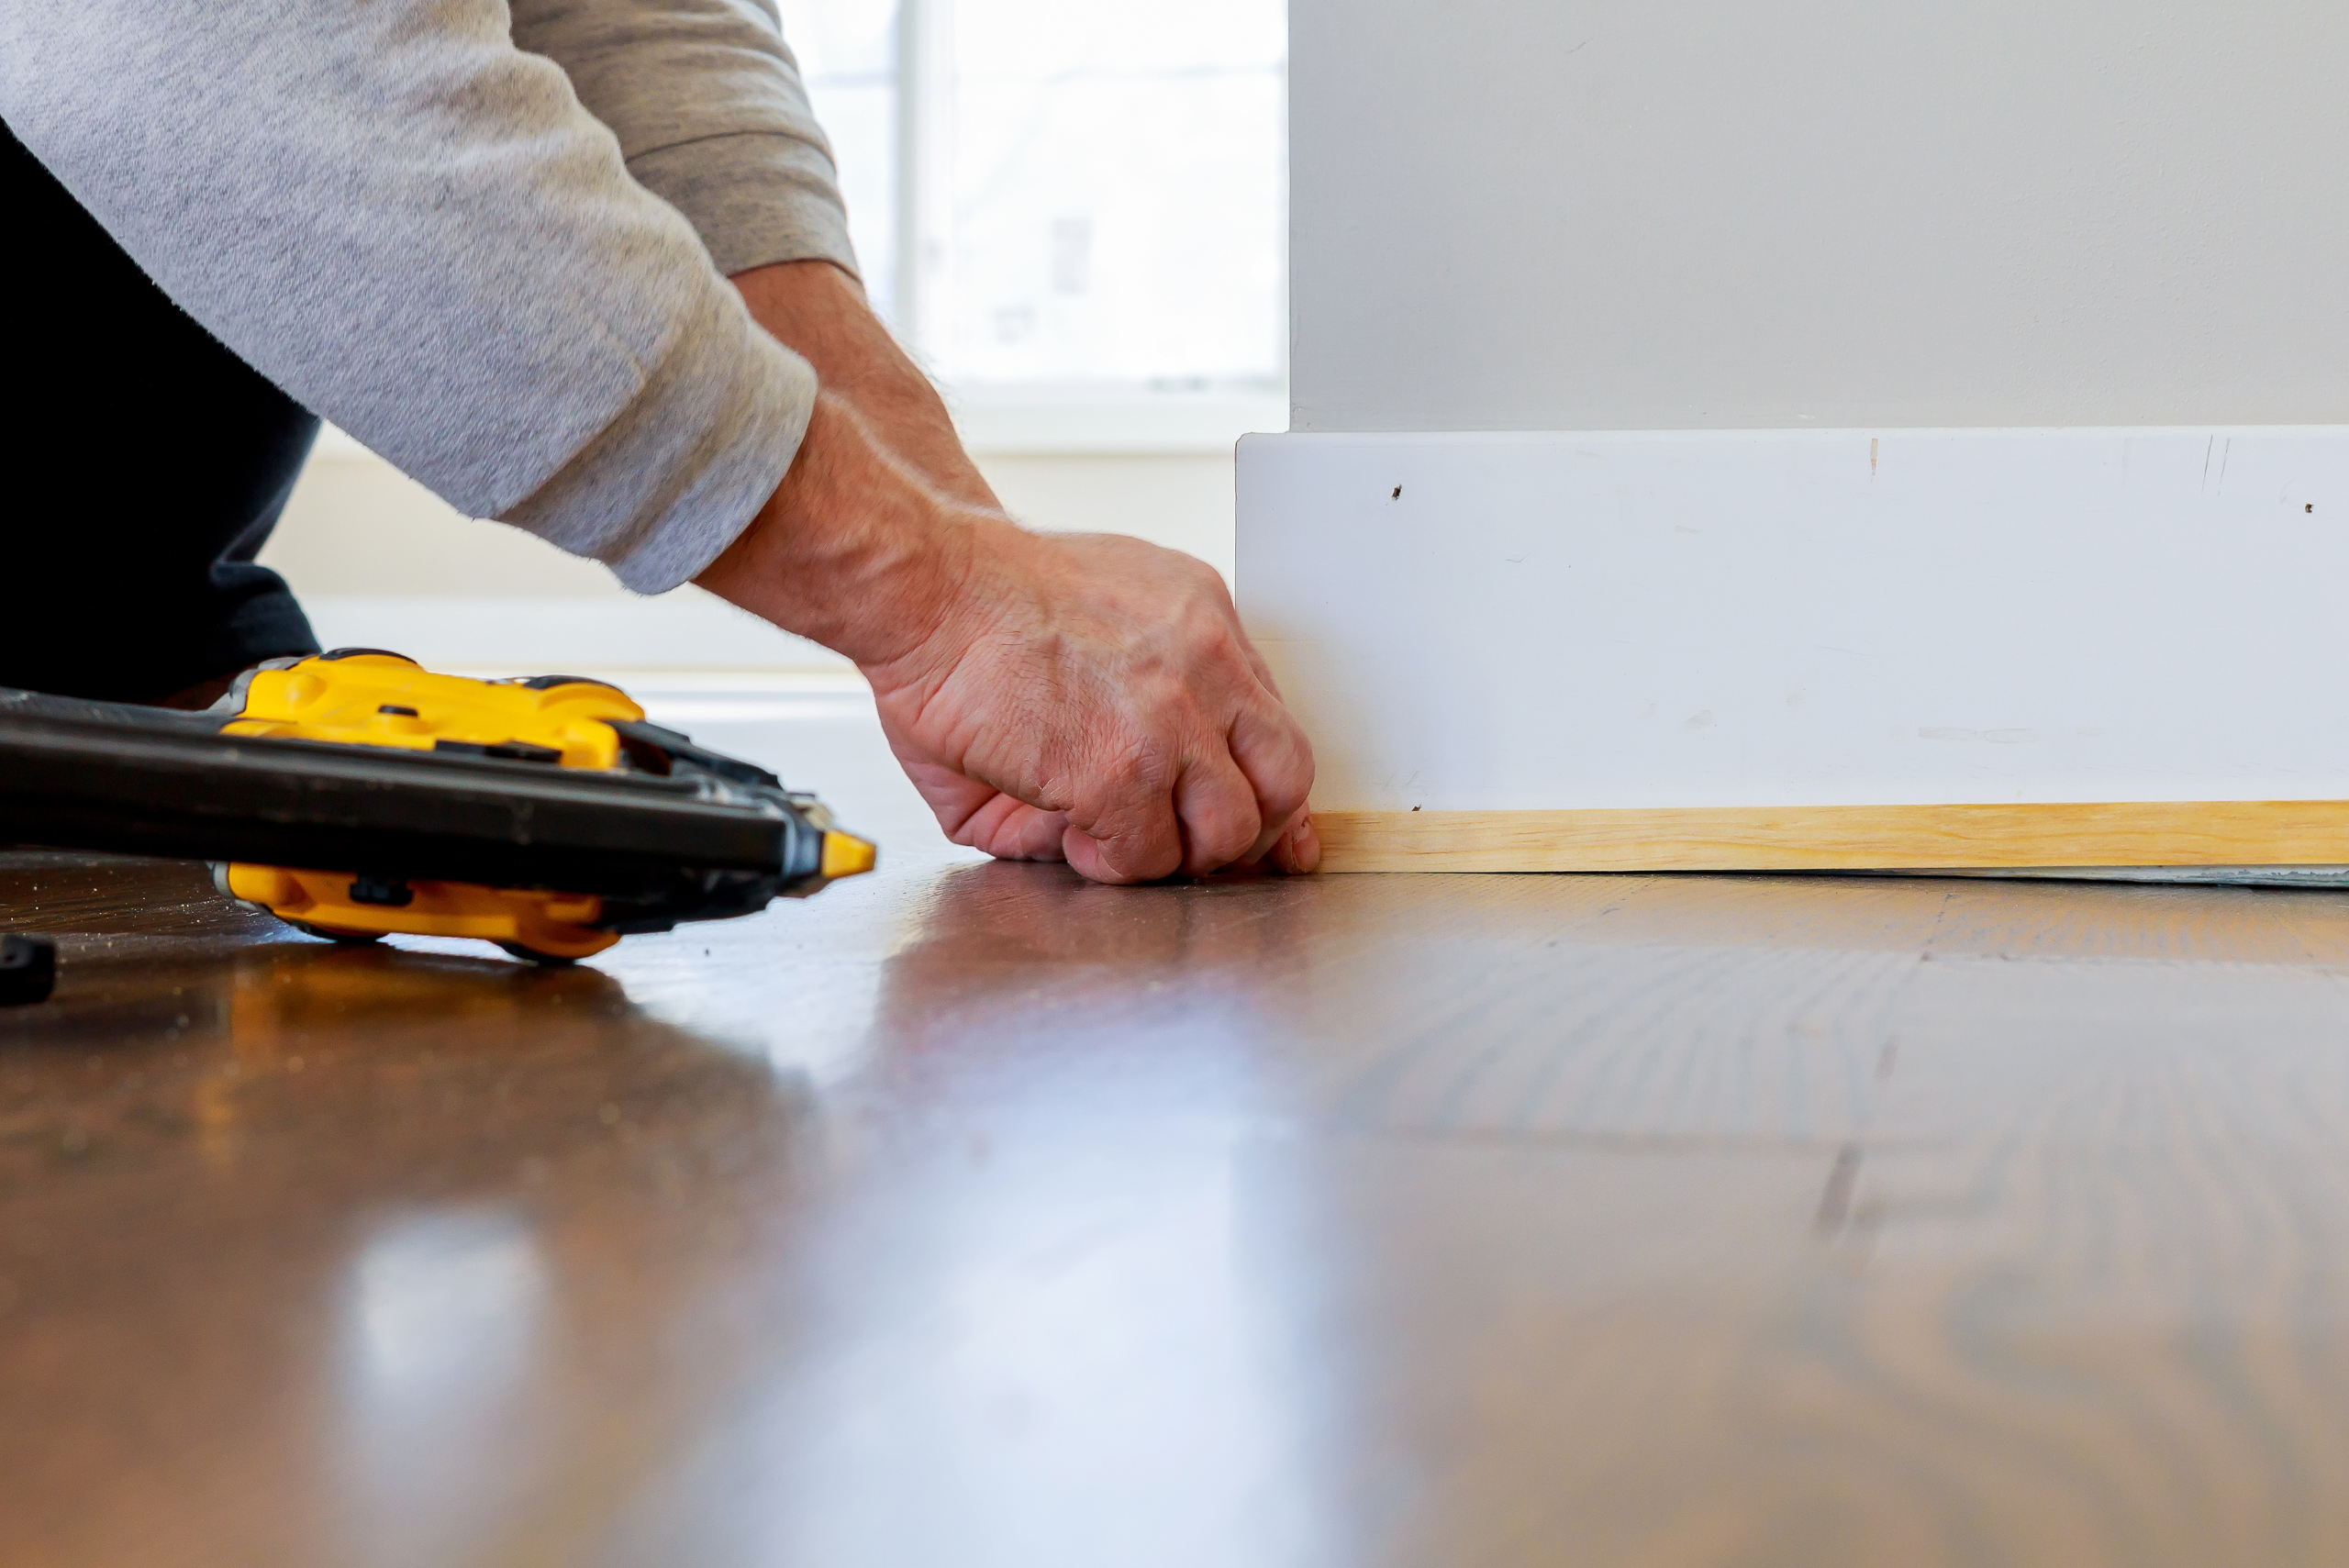 A person using a pin nailer to secure baseboards.